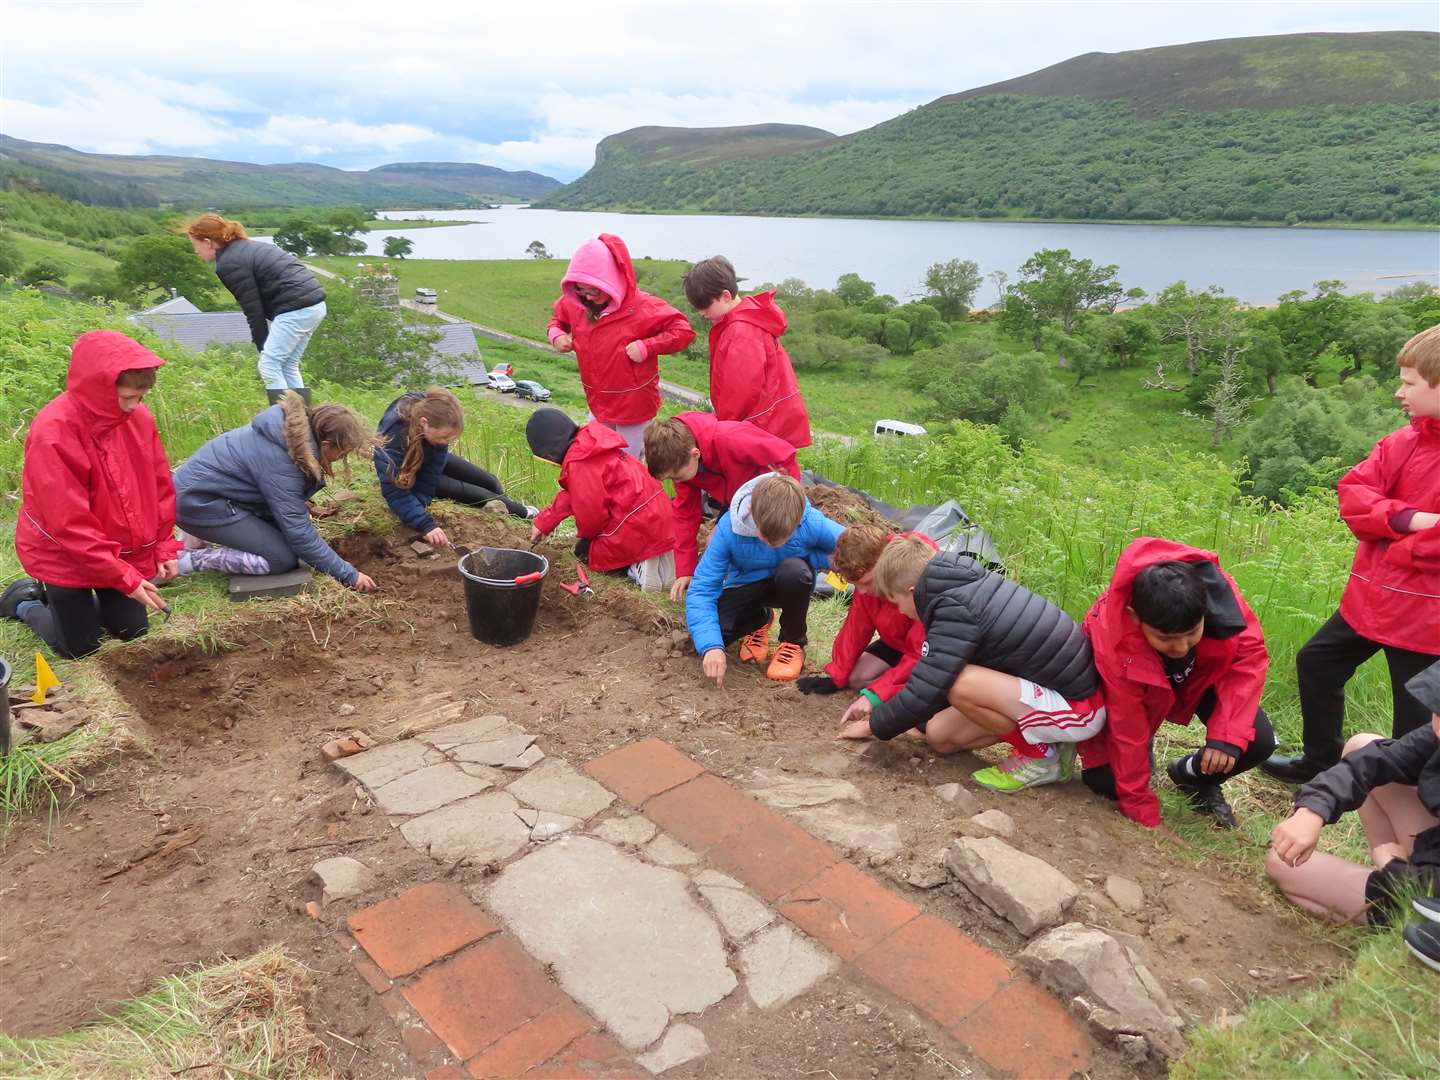 Senior classes from Brora primary school visited the dig and were put to work. Here they are digging close to the stunning red clay tiles at the doorway.